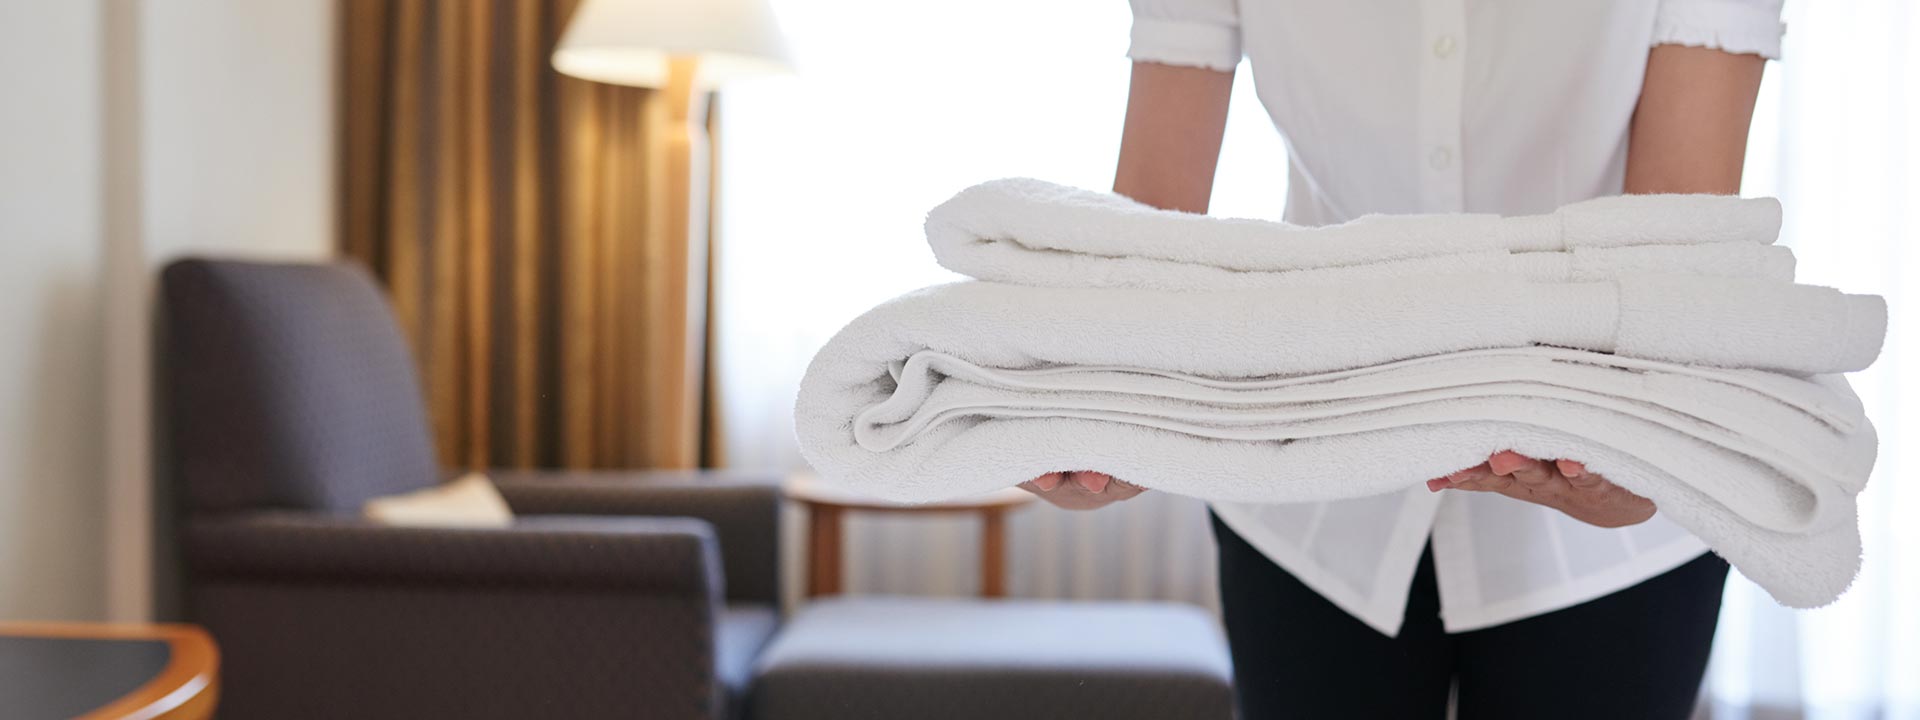 Housekeeping Doesn’t Have to Be a Dirty Word